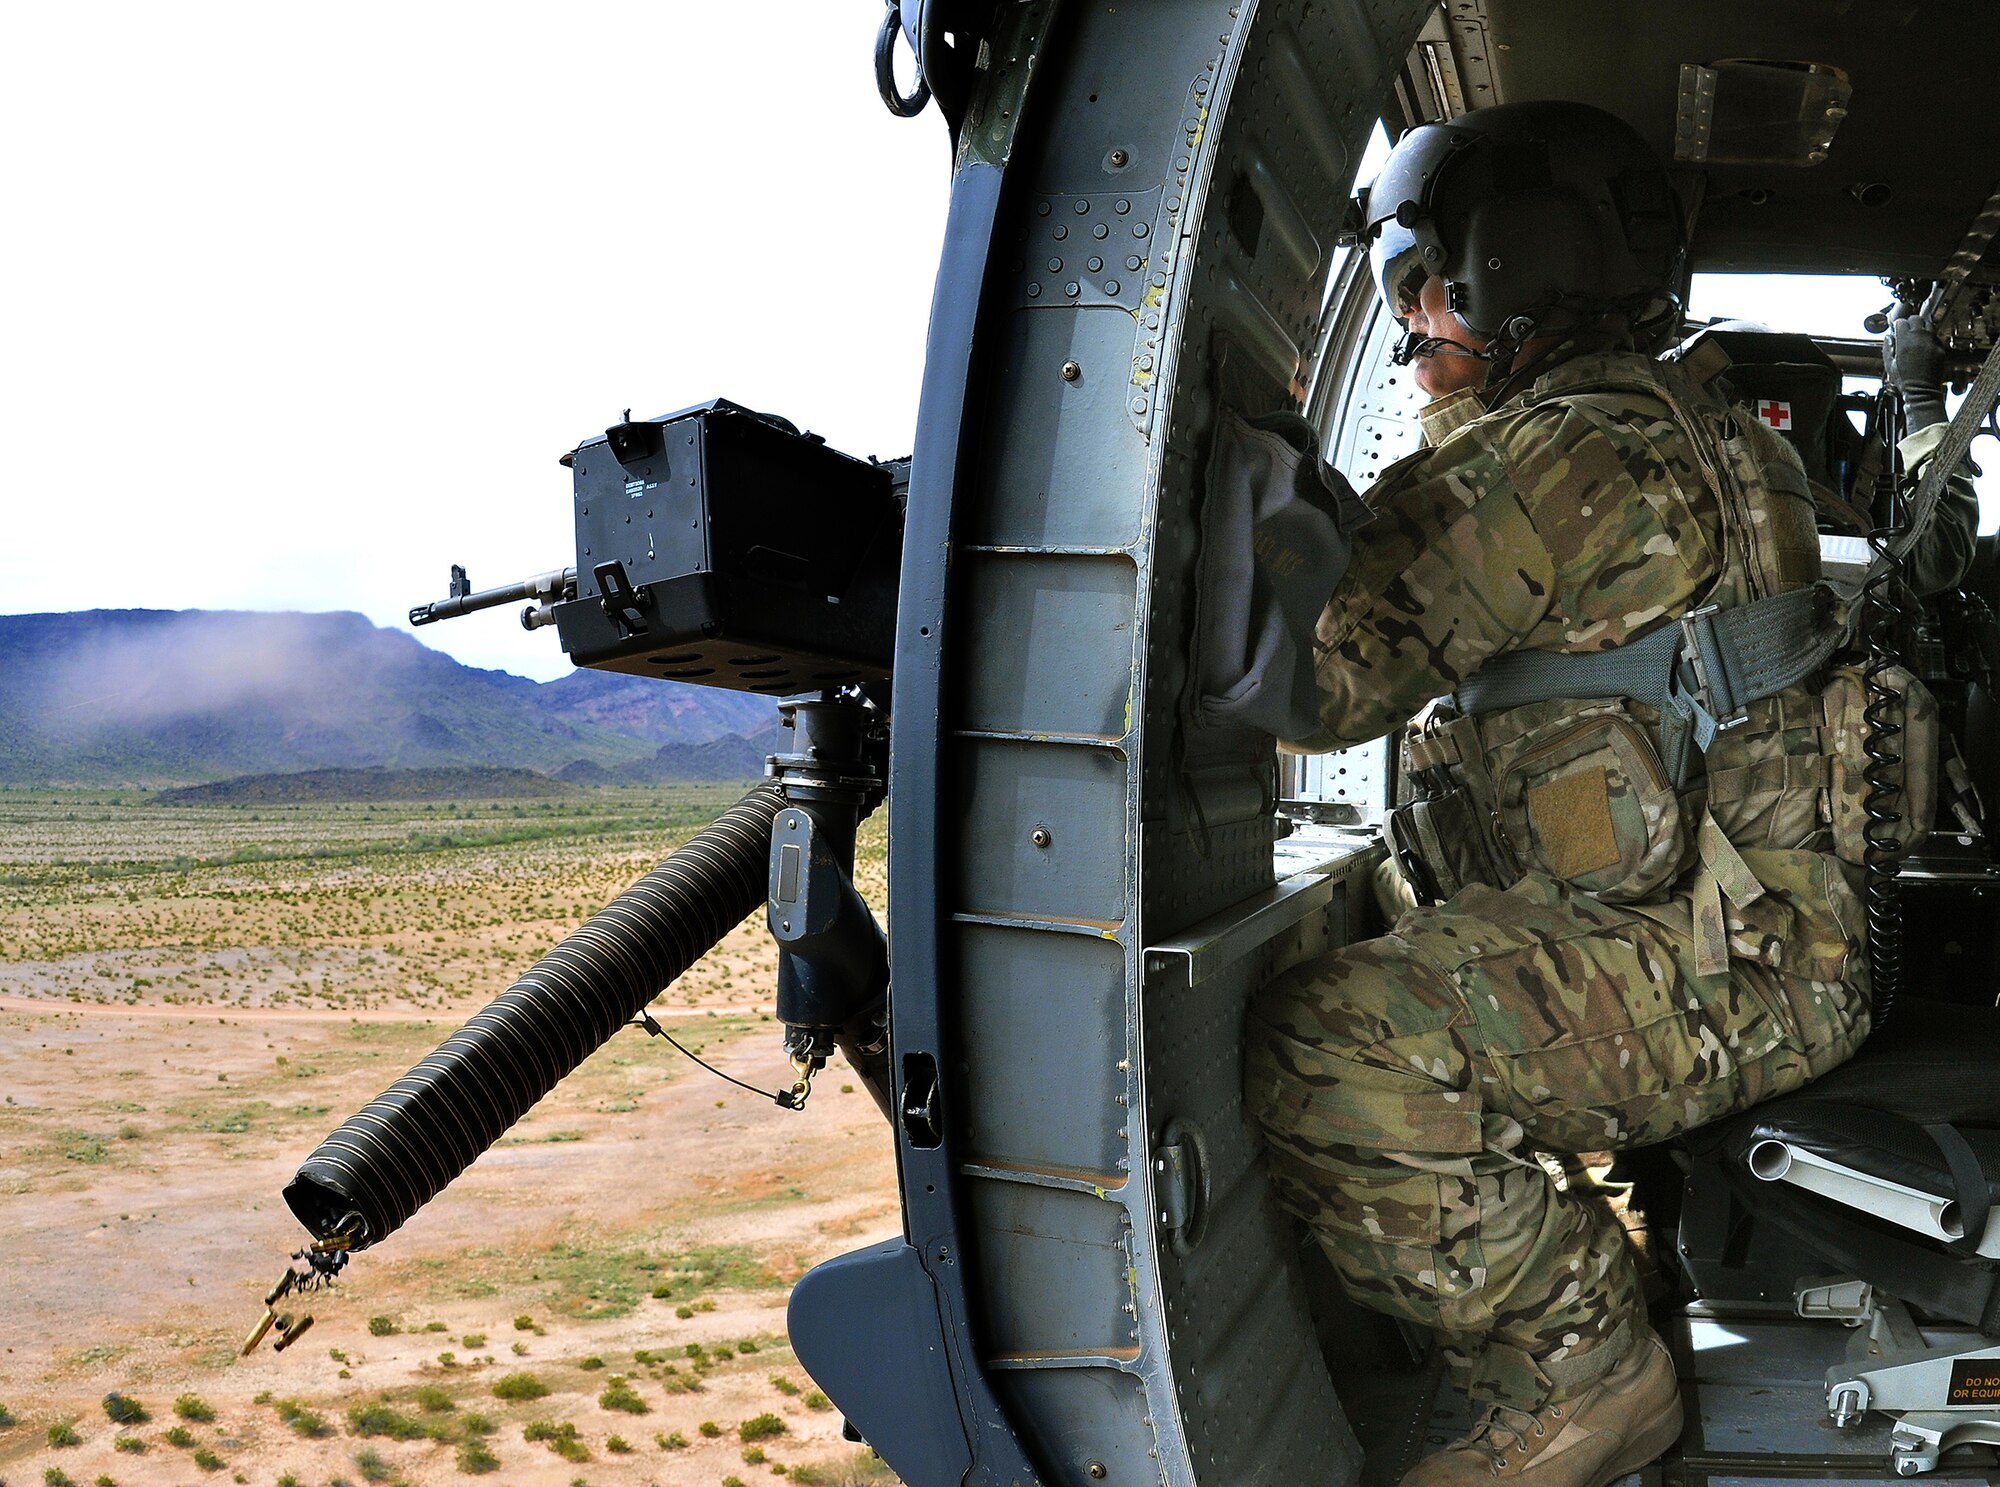 DAVIS-MONTHAN AIR FORCE BASE, Ariz. –Air Force special mission aviation Airman assigned to the Air 305th Rescue Squadron, shoots the .50-caliber machine gun onboard a HH-60G Pave Hawk helicopter during a training mission March 4. The 305th RQS is assigned to the 943rd Rescue Group, which is assigned to the 920th Rescue Wing, Patrick AFB, Fla. The 943rd RQG trains and equips Citizen Airmen to perform personnel recovery operations worldwide. (U.S. Air Force photo/Tech. Sgt. Frank Oliver) 